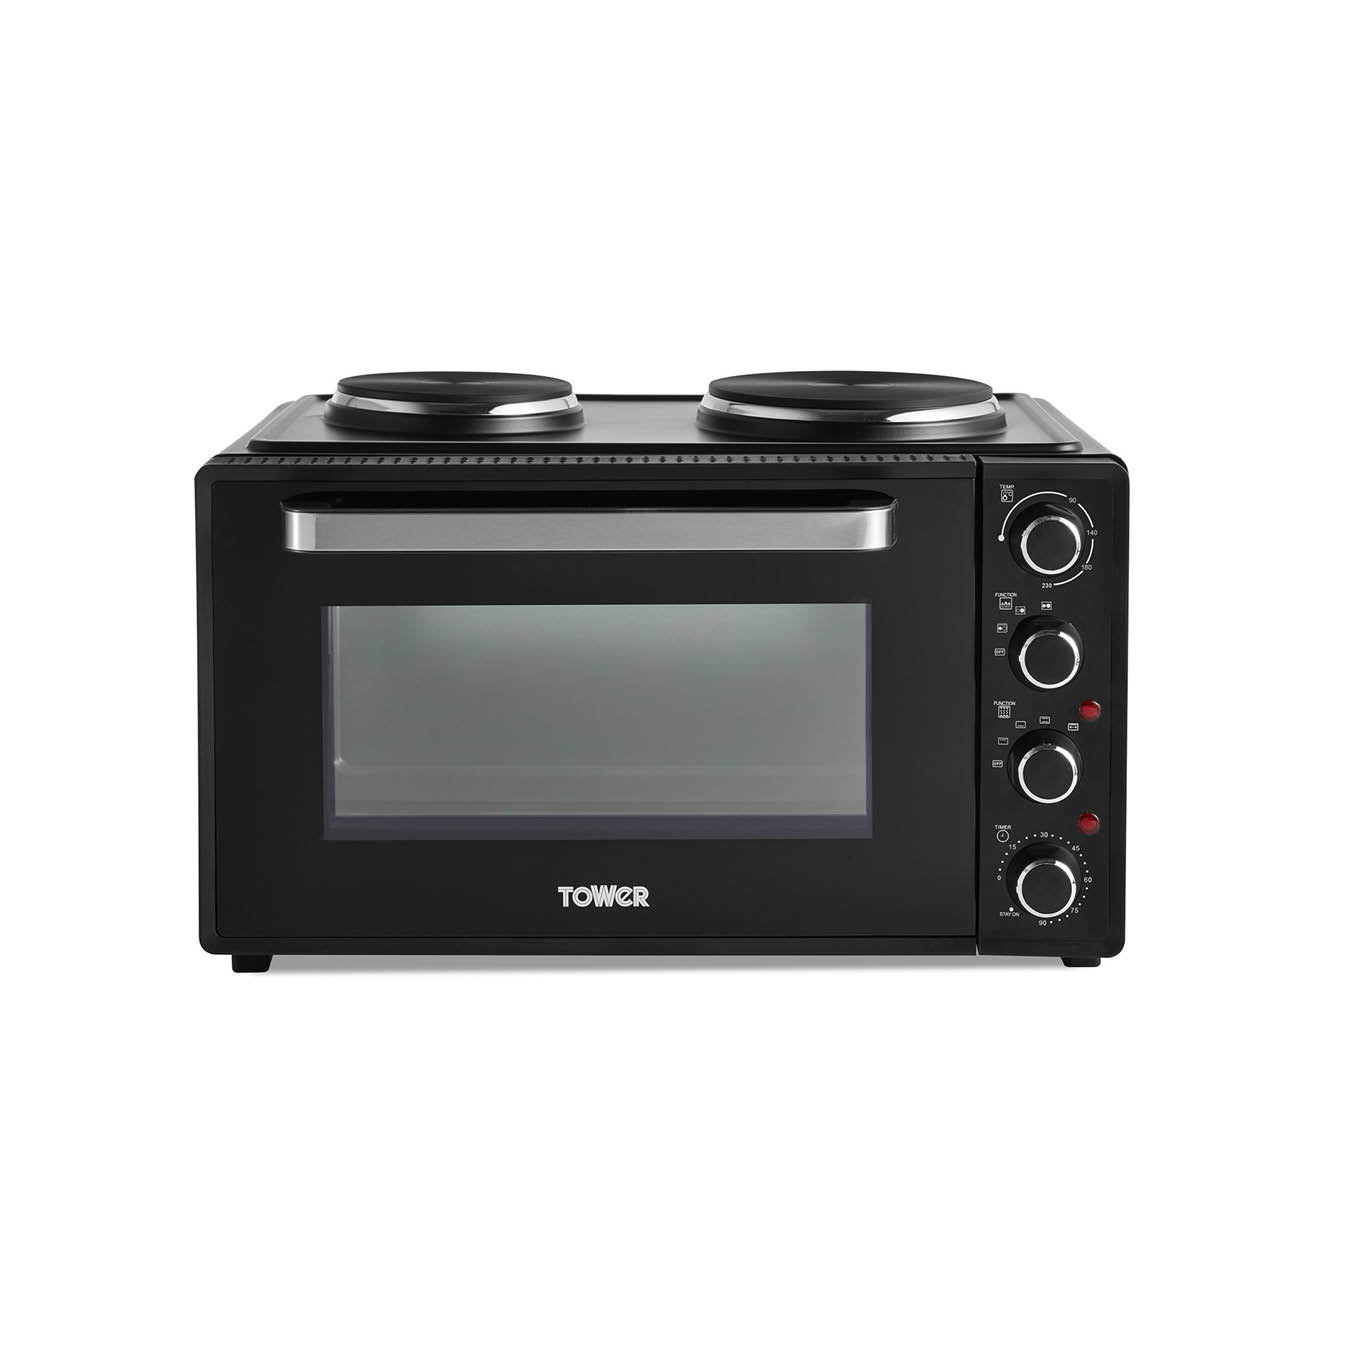 schending Kostuum binnenkort Tower T14045 Mini Oven with Adjustable Temperature Control, 90 Minute  Timer, Baking Tray and Wire Rack, Black with Silver Accents, 42 litre &  Reviews | Wayfair.co.uk